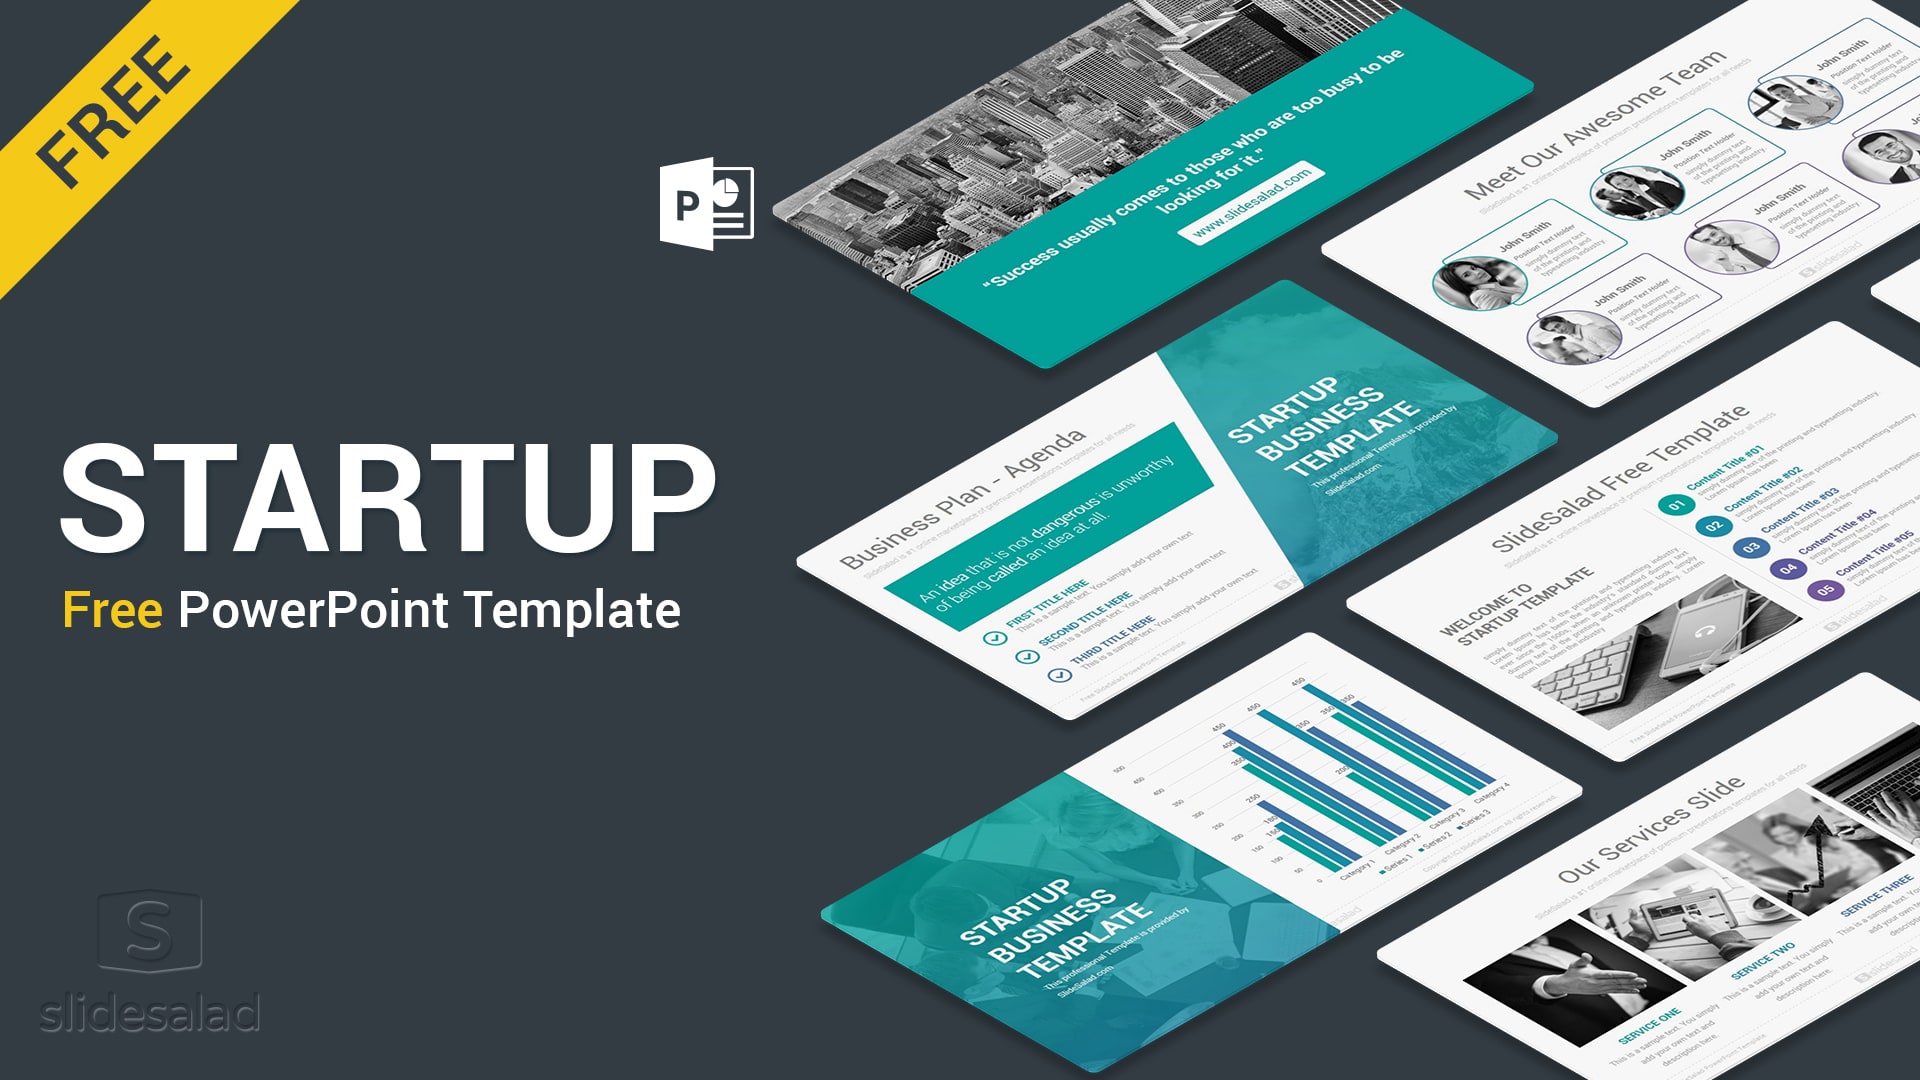 Sample Templates For Powerpoint Presentation